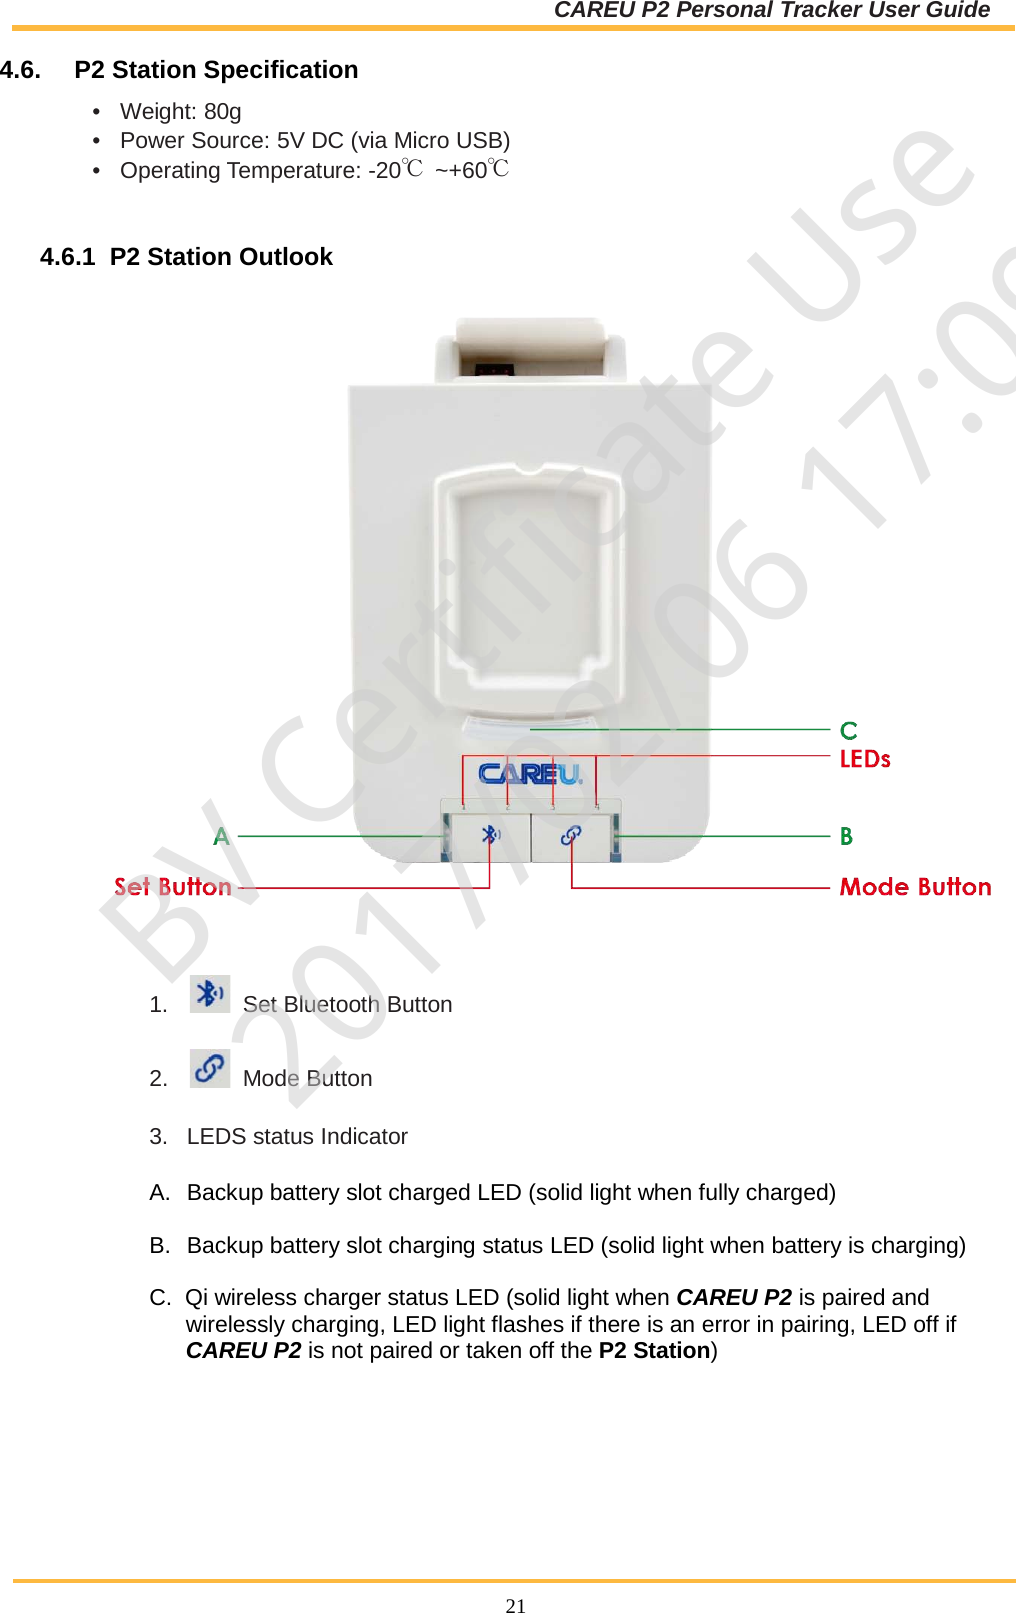 CAREU P2 Personal Tracker User Guide  21 4.6.  P2 Station Specification •  Weight: 80g •  Power Source: 5V DC (via Micro USB) •  Operating Temperature: -20℃ ~+60℃   4.6.1  P2 Station Outlook  1.     Set Bluetooth Button  2.     Mode Button  3.  LEDS status Indicator  A. Backup battery slot charged LED (solid light when fully charged)  B. Backup battery slot charging status LED (solid light when battery is charging)  C.  Qi wireless charger status LED (solid light when CAREU P2 is paired and wirelessly charging, LED light flashes if there is an error in pairing, LED off if CAREU P2 is not paired or taken off the P2 Station)      BV Certificate Use2017/02/06 17:09